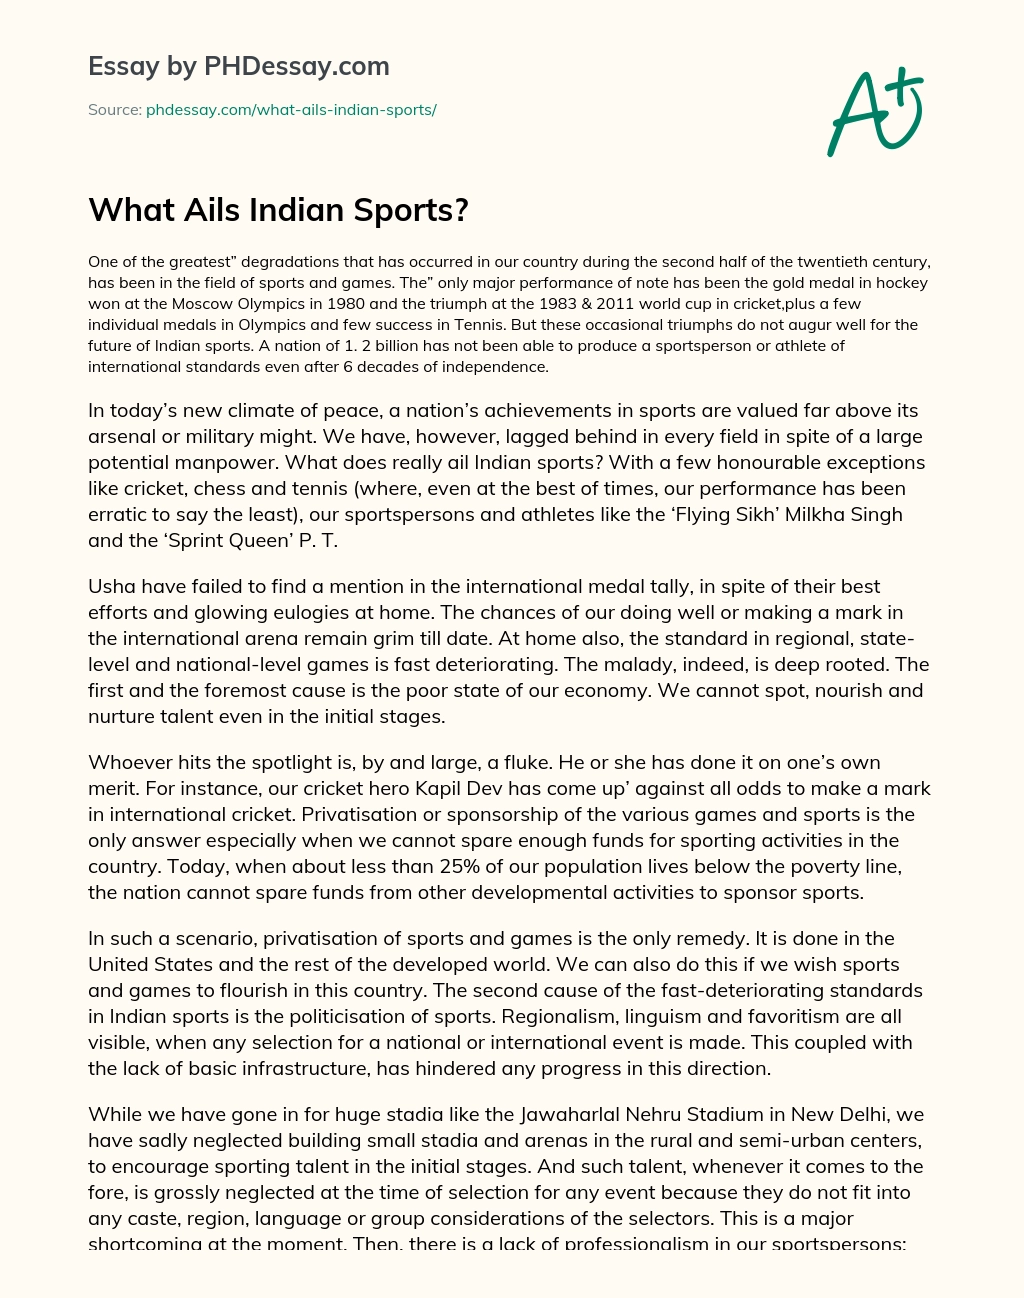 What Ails Indian Sports? essay